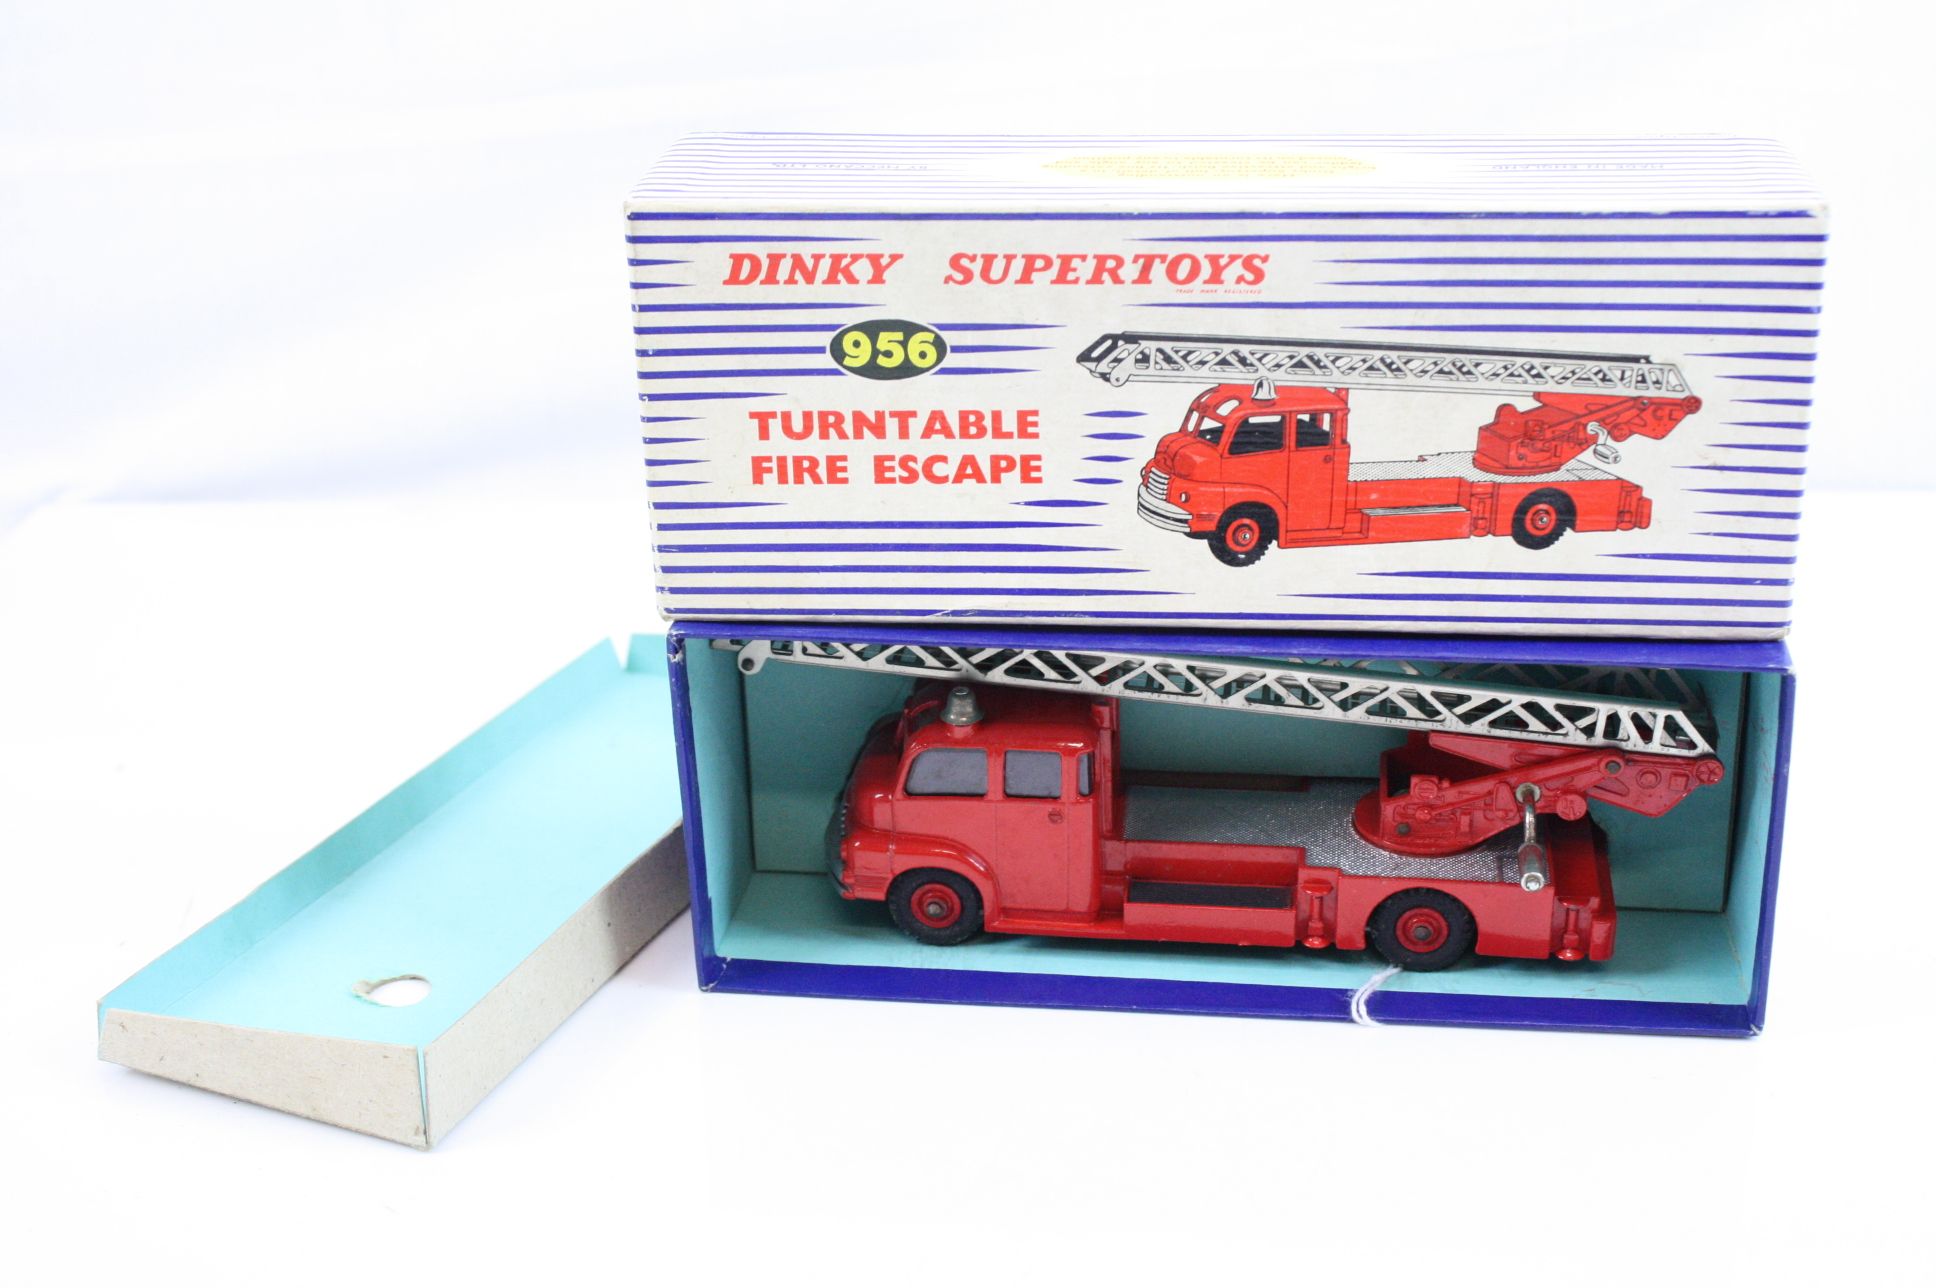 Boxed Dinky 956 Turntable Fire Escape diecast model with instructions, diecast vg with a few paint